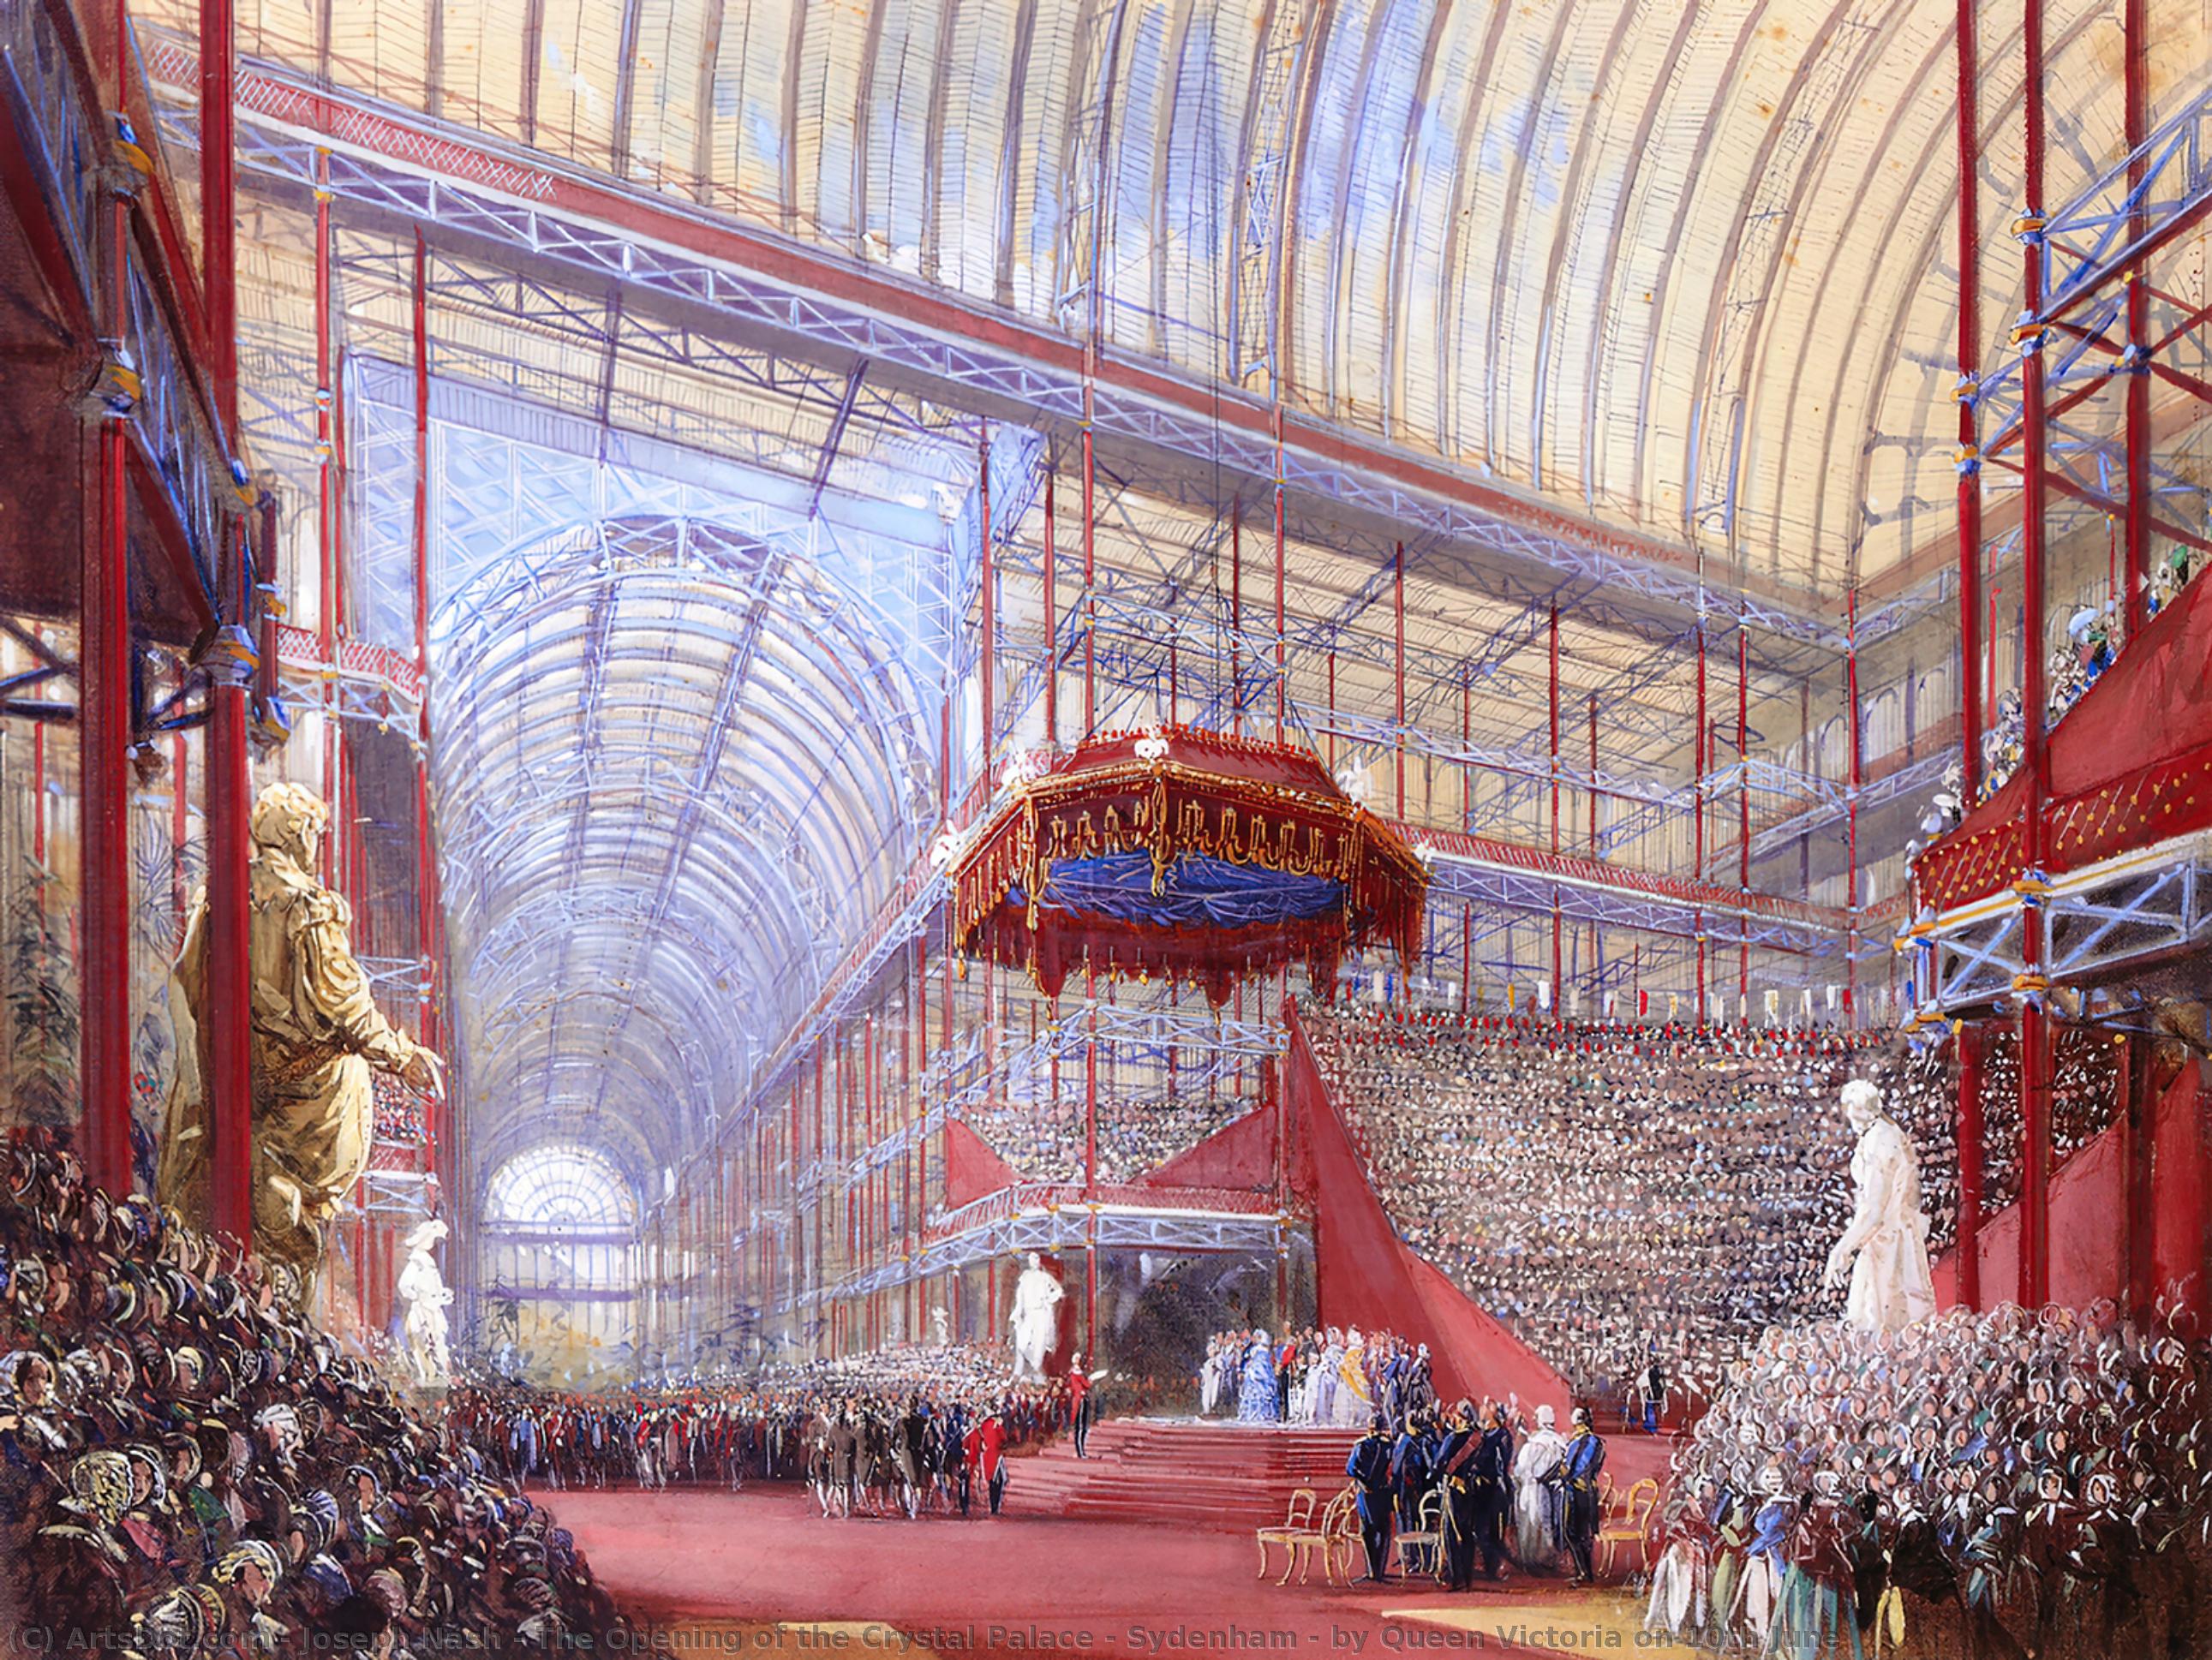 WikiOO.org - Encyclopedia of Fine Arts - Maleri, Artwork Joseph Nash - The Opening of the Crystal Palace - Sydenham - by Queen Victoria on 10th June